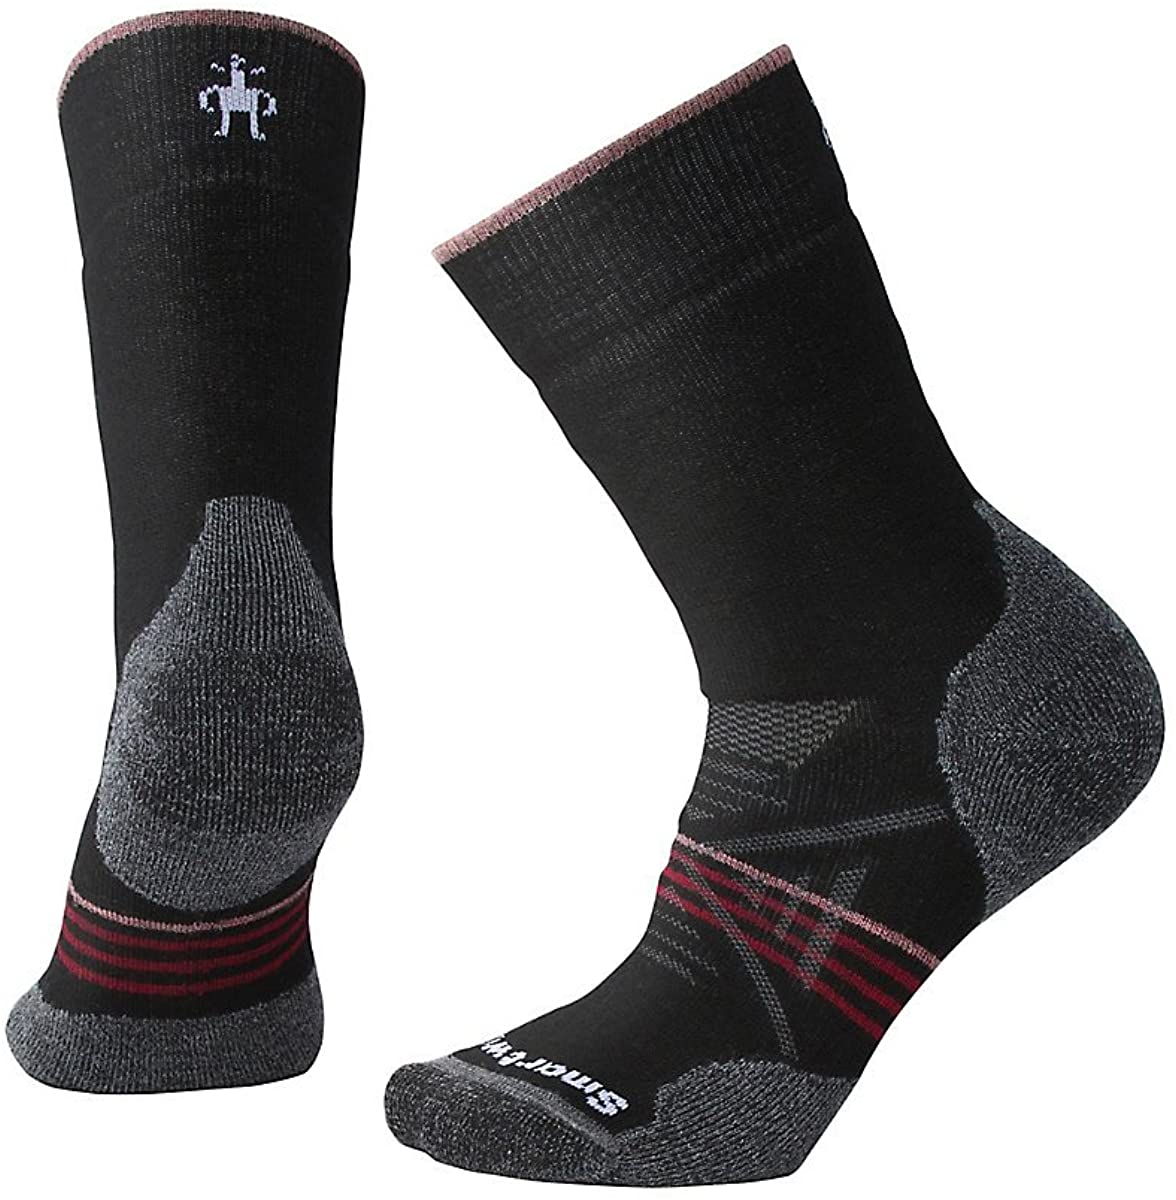 Women's Smartwool PhD Outdoor Medium Hiking Crew Socks in Black-Tibetan Red color from the side view